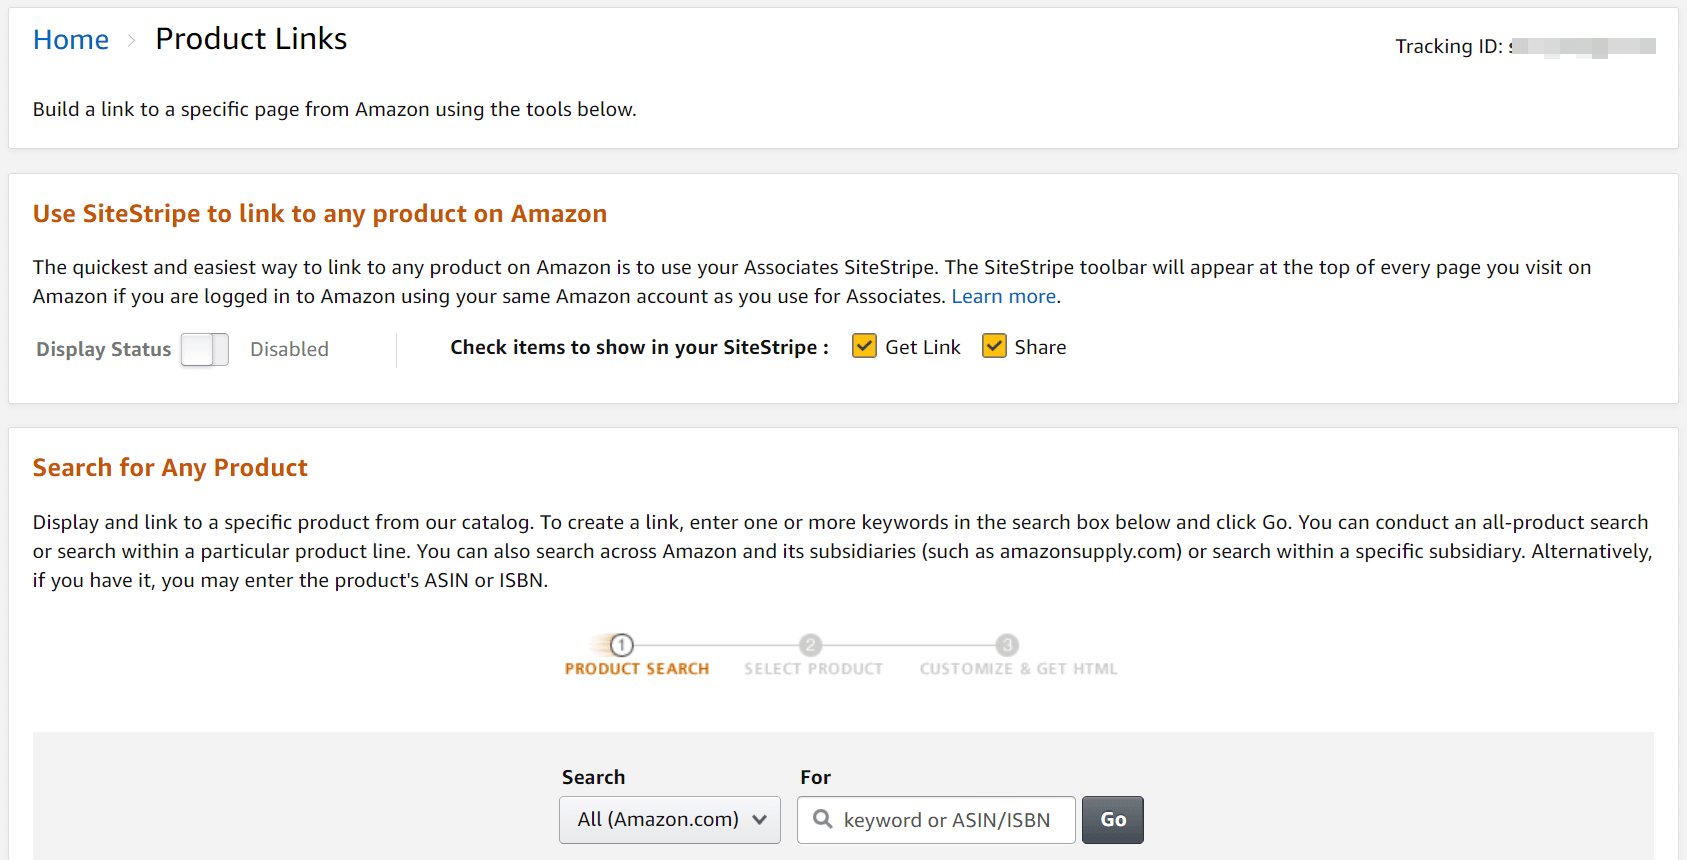 The Product Links page for the Amazon Associates program. 